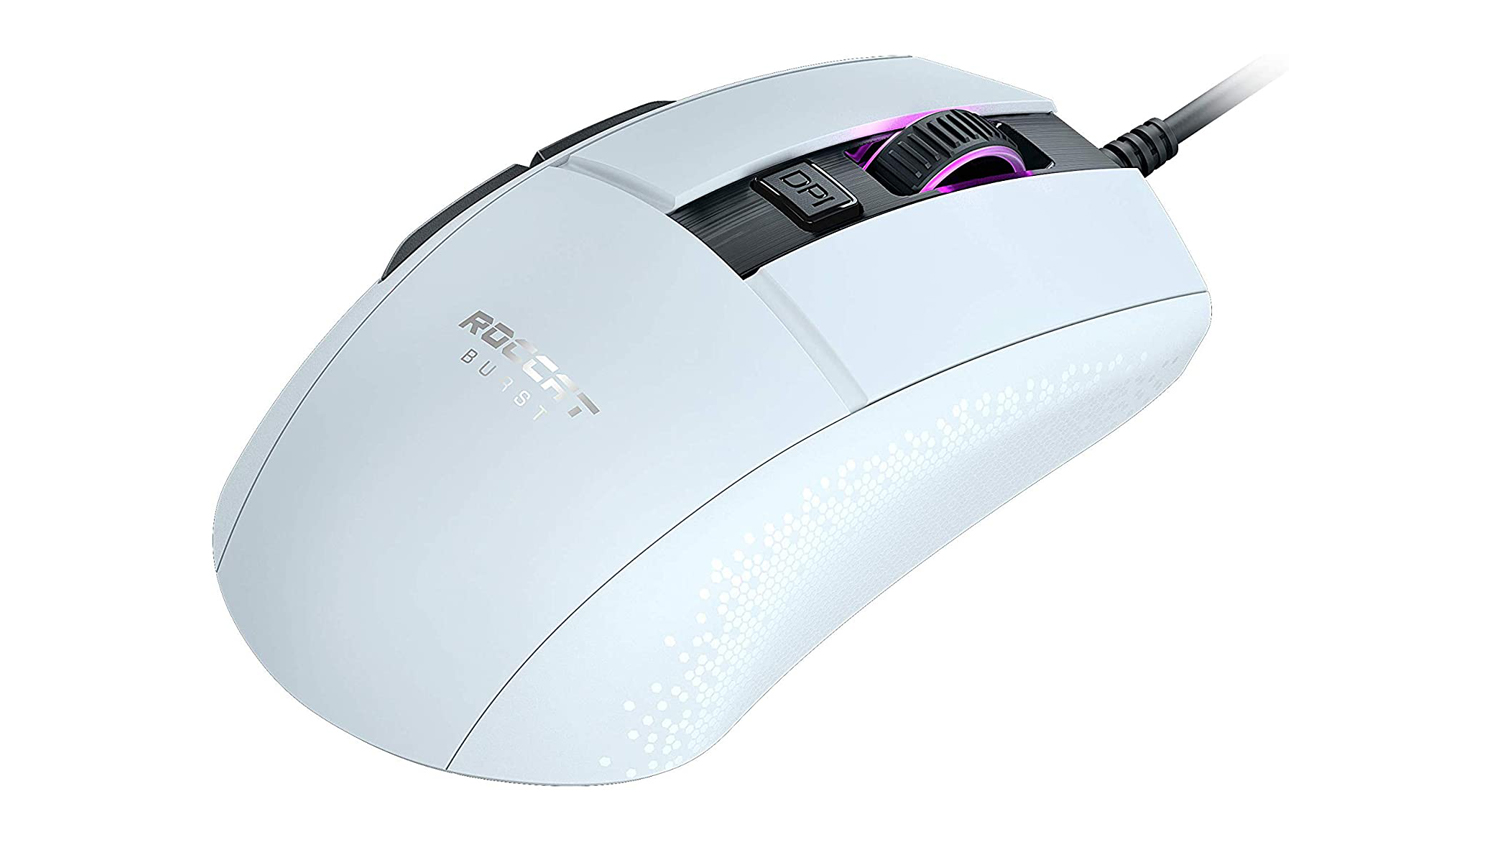 Roccat Burst Core with its wheel RGB lighting turned on, on a white background